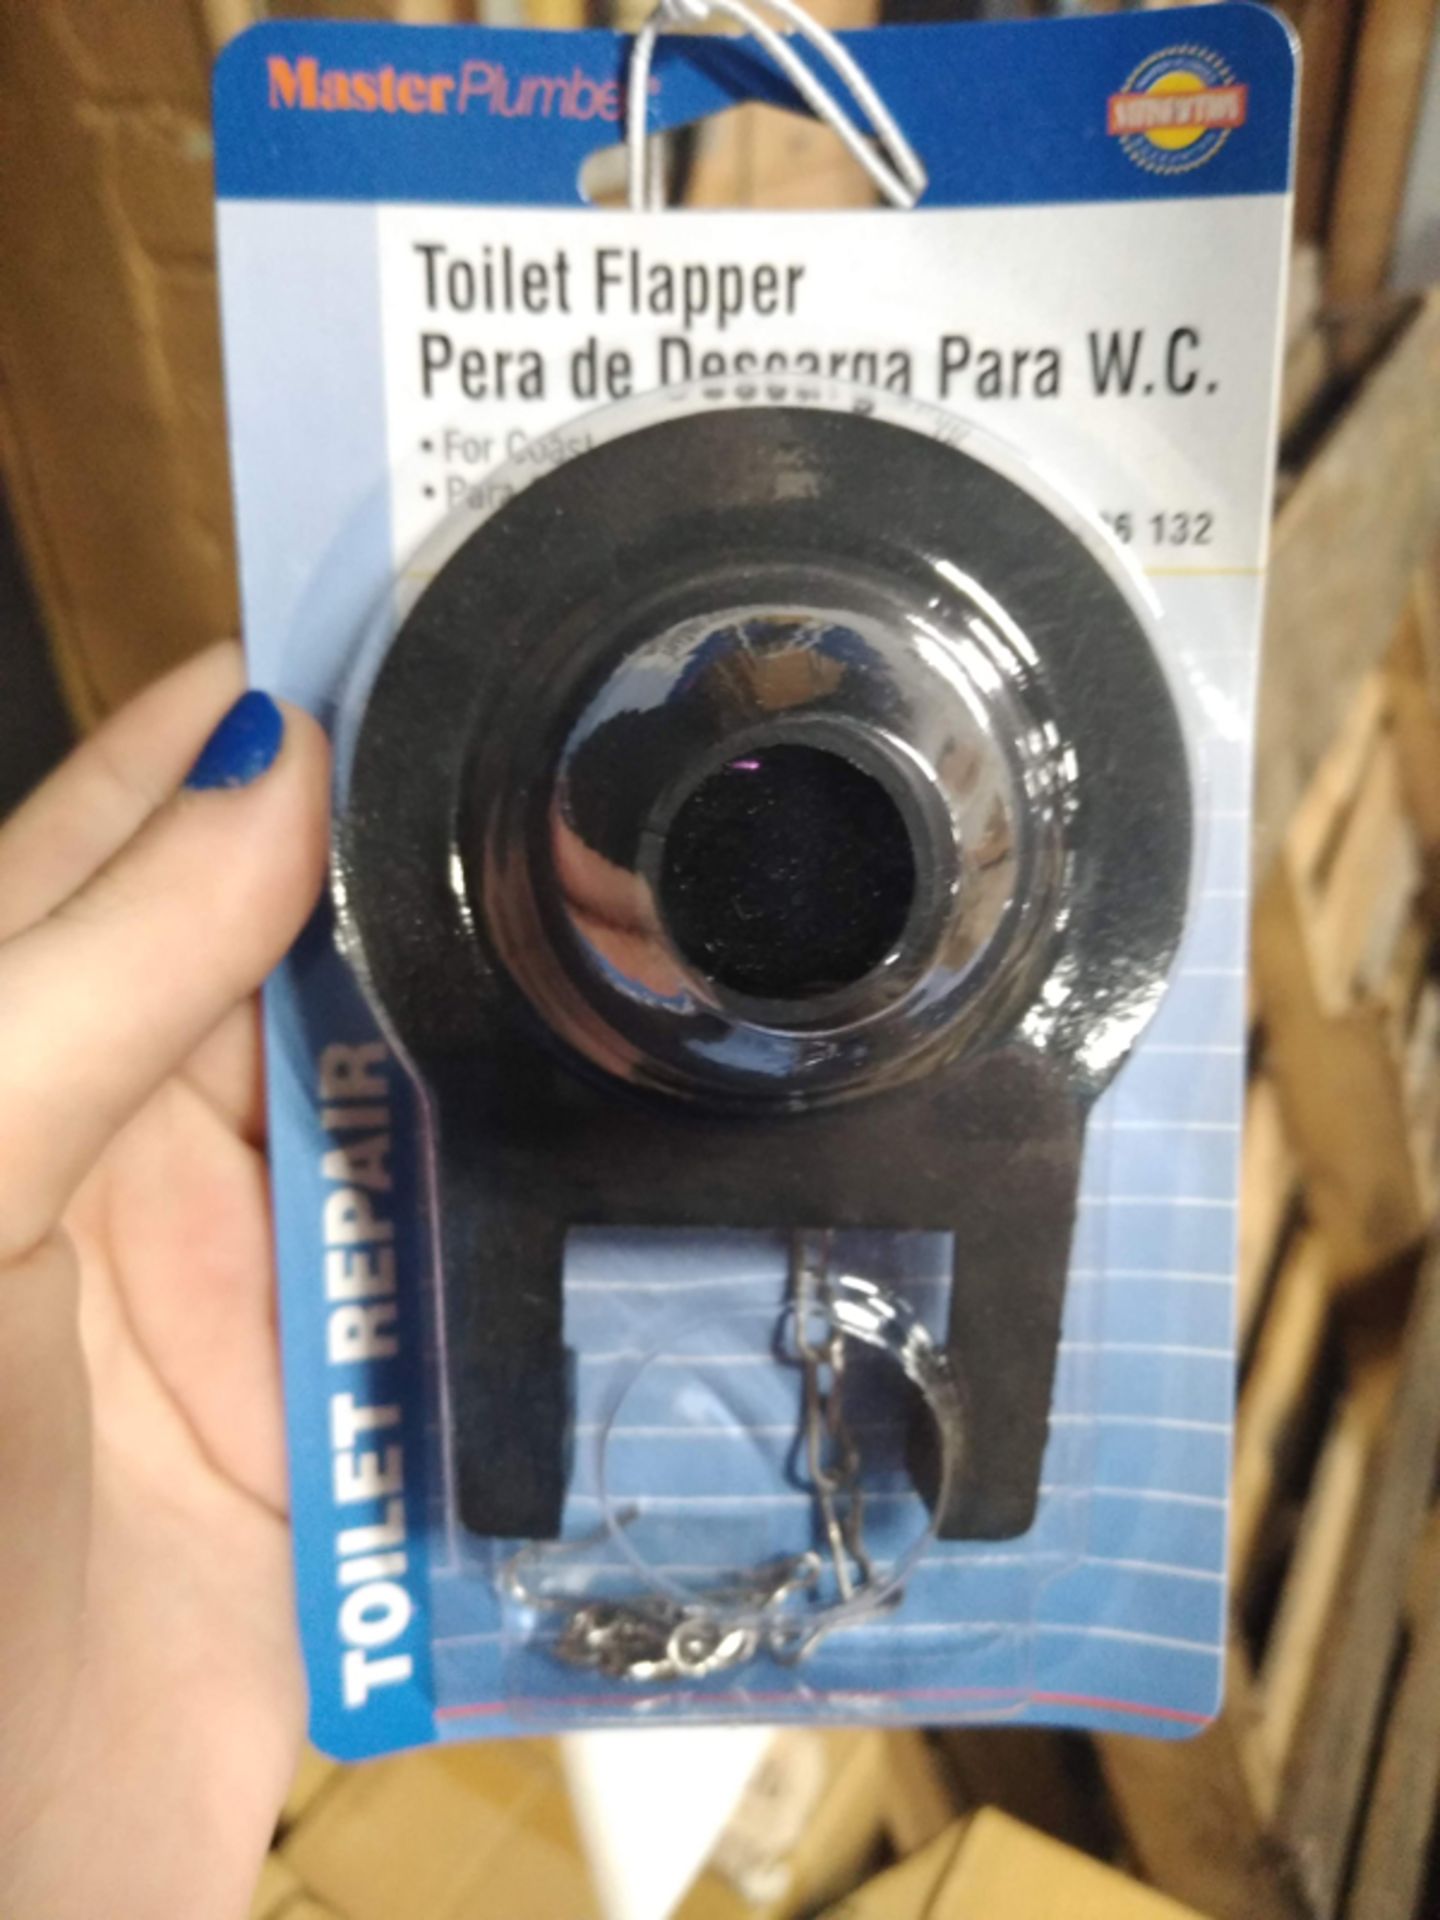 LOT OF 70 MASTER PLUMBER TOILET FLAPPERS